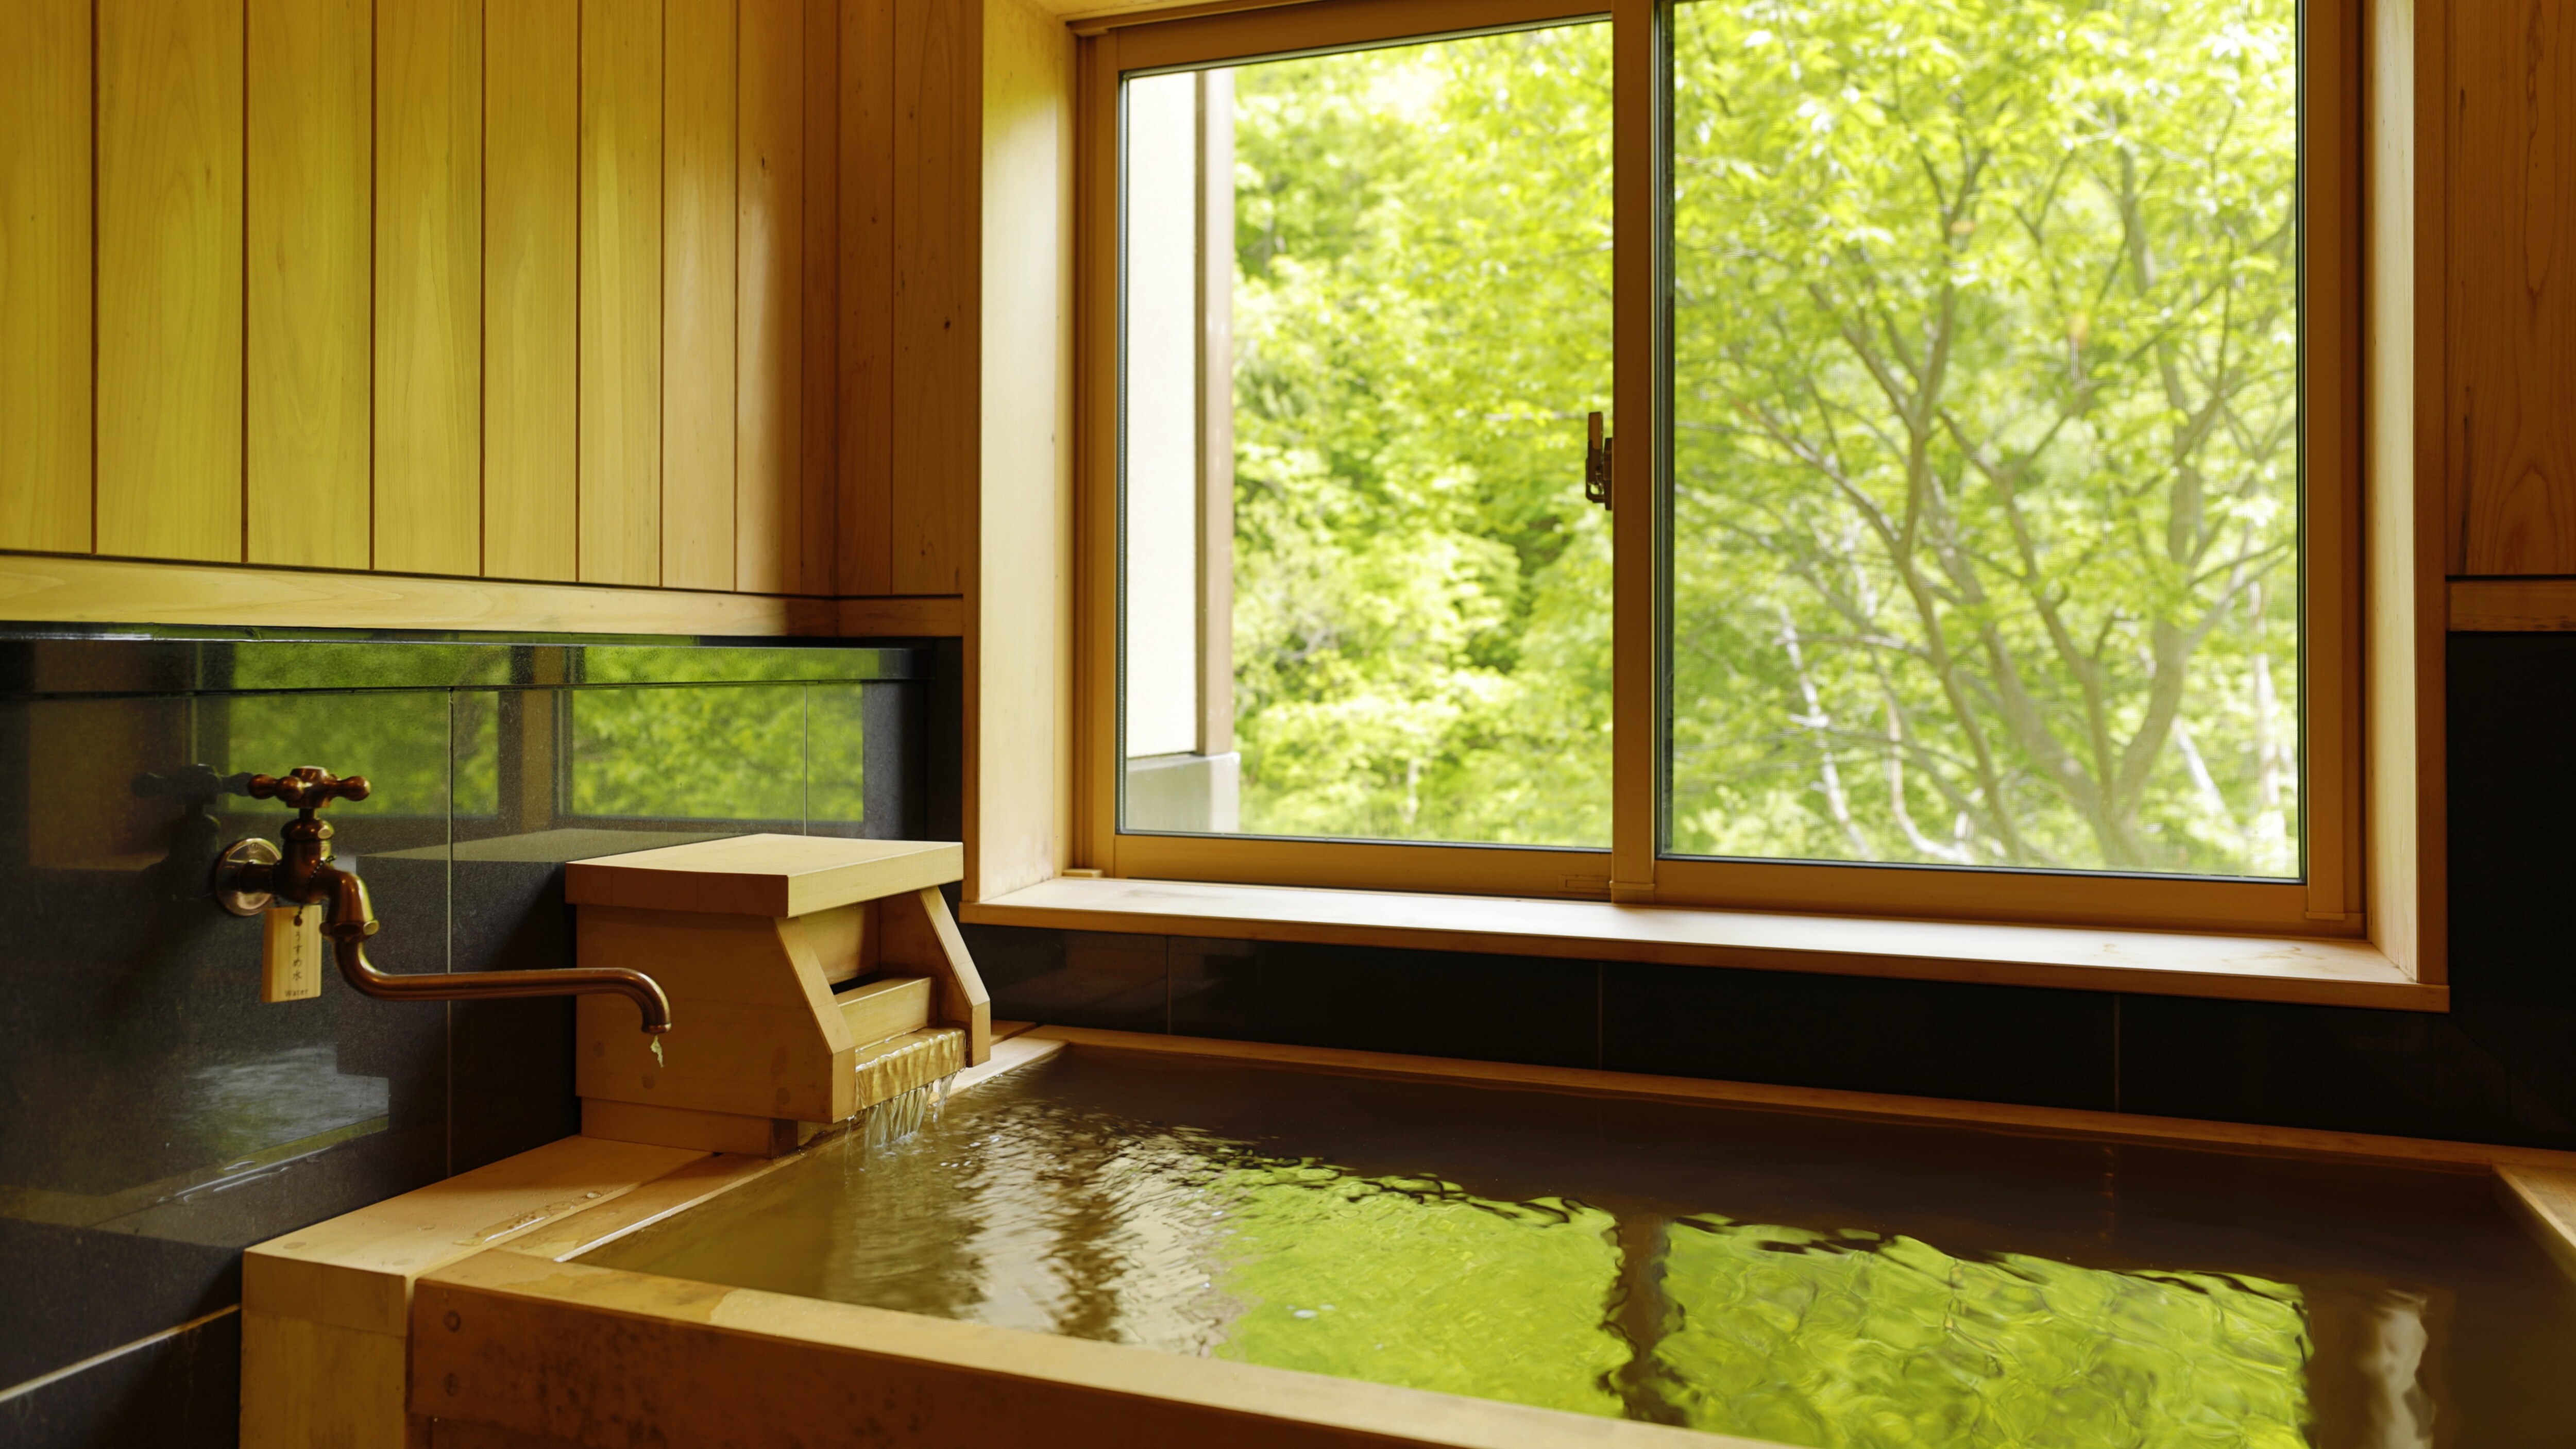 An example of an indoor bath: You can enjoy hot springs fed directly from our own source in the hot spring guest room bath.